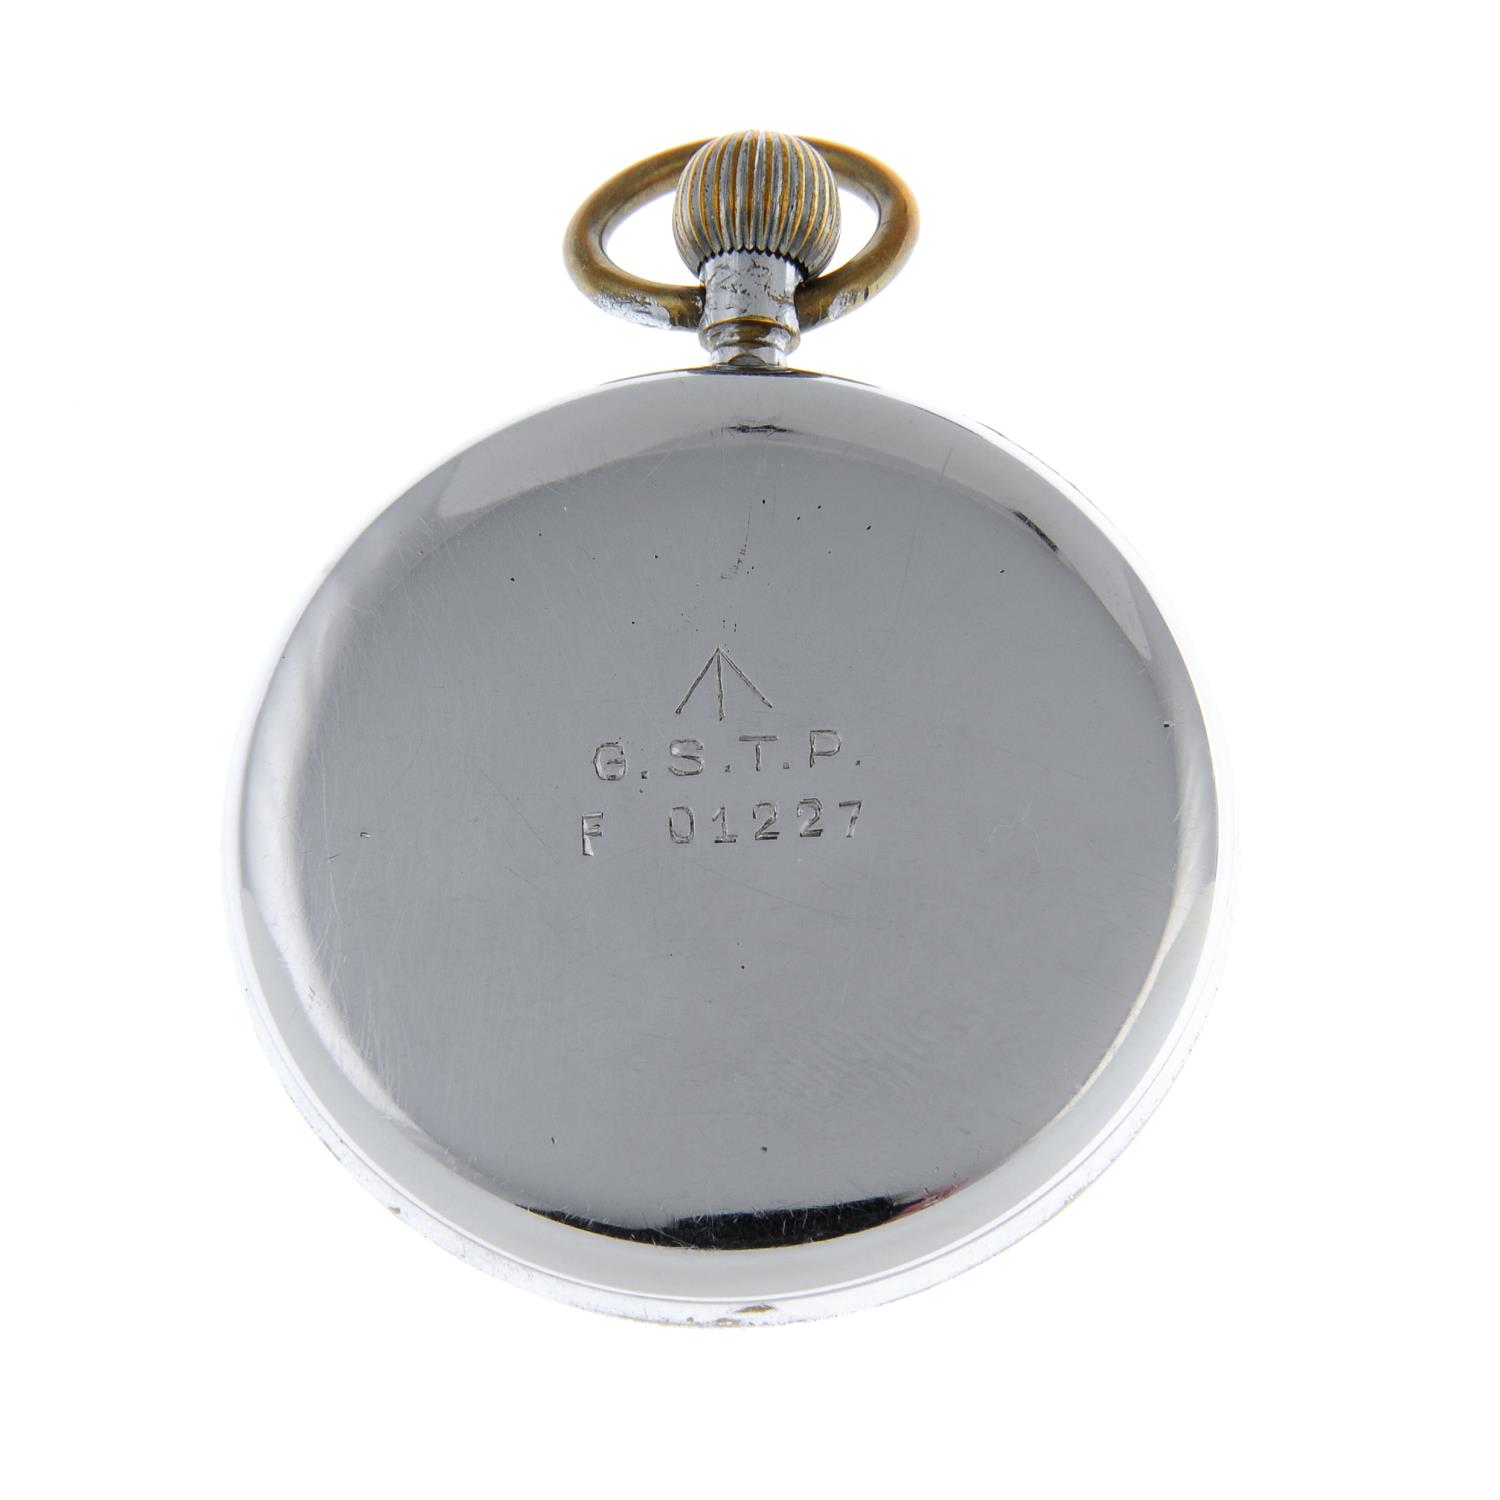 An open face military issue pocket watch by Jaeger-LeCoultre. - Image 2 of 2